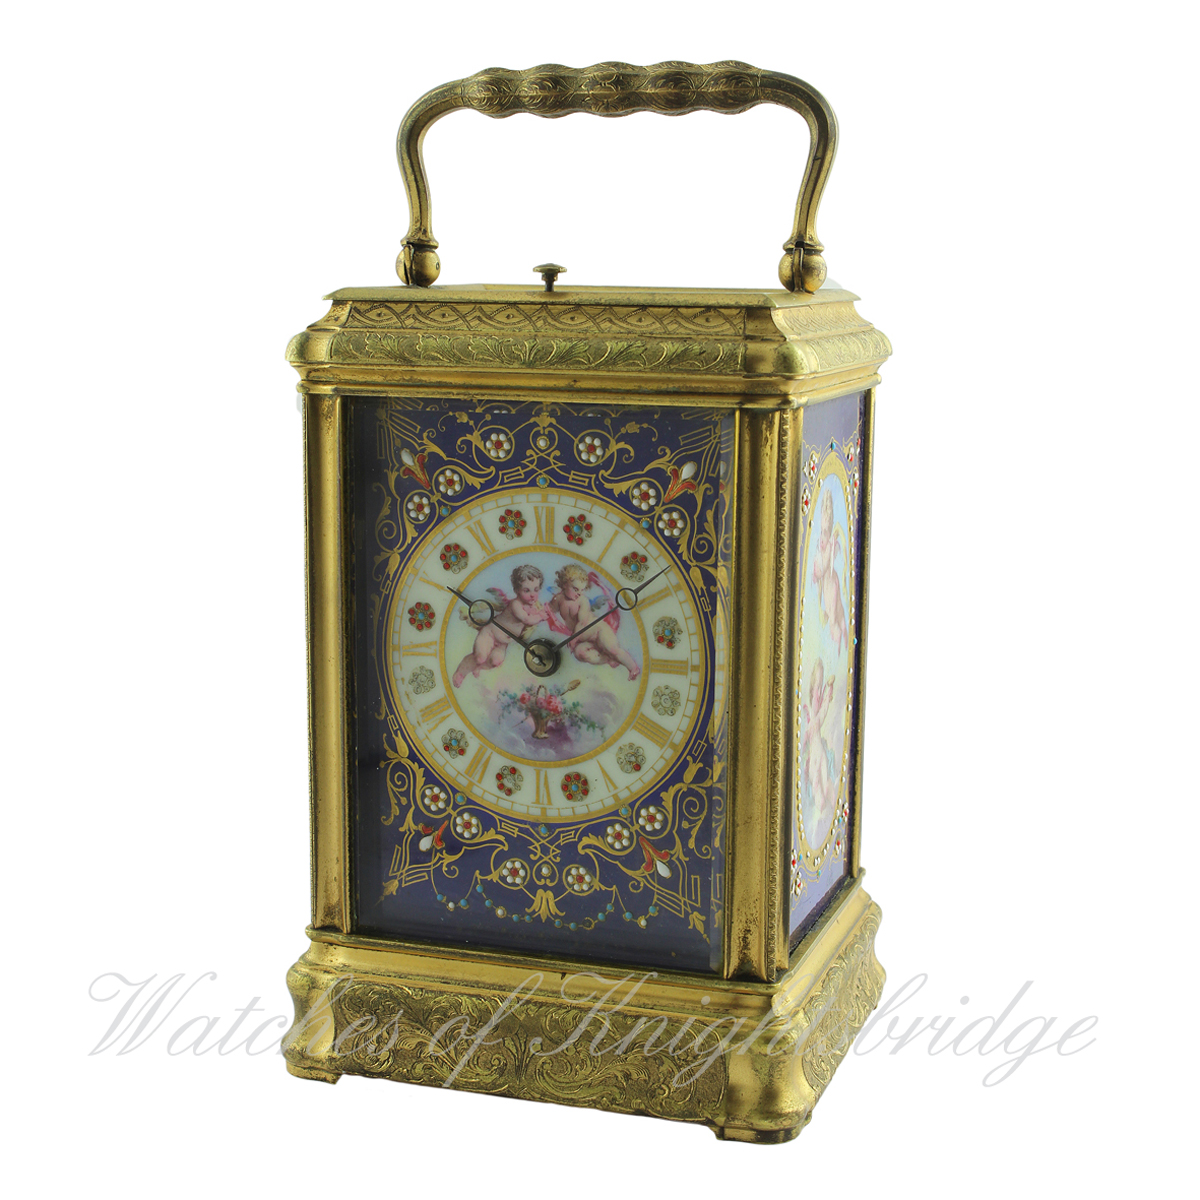 A FINE & RARE FRENCH PORCELAIN PANEL REPEATING CARRIAGE CLOCK CIRCA 1880, REF. 6199 D: Circular